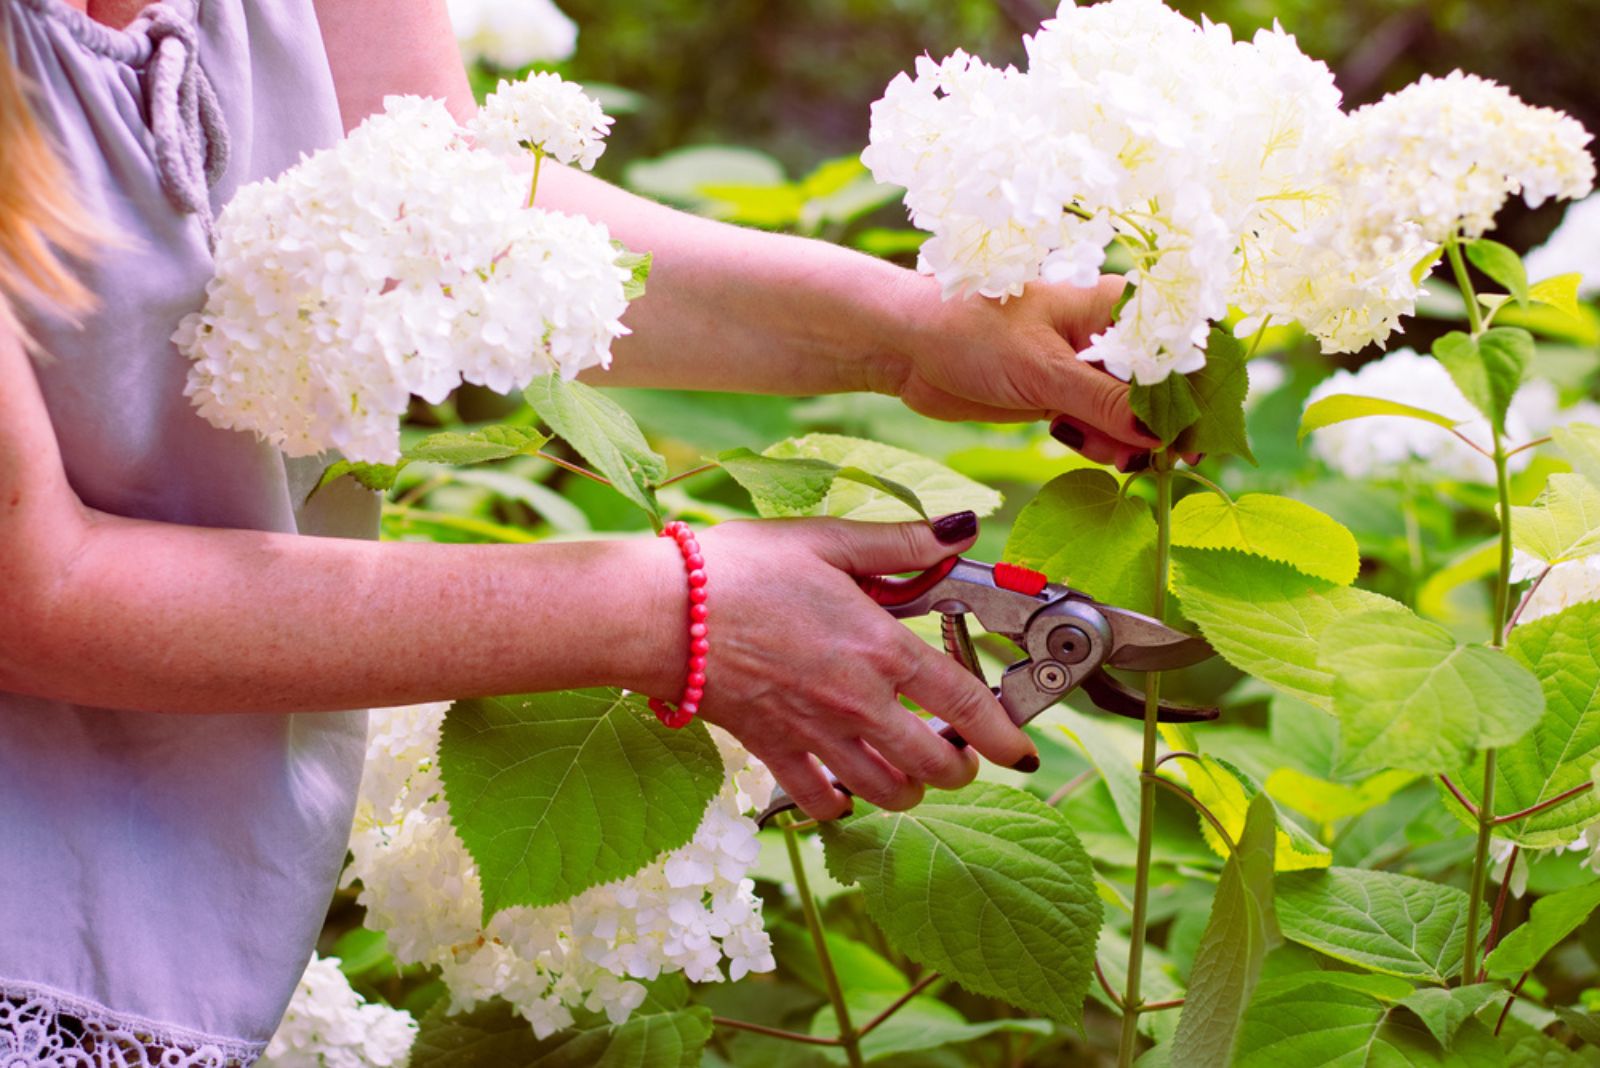 Woman cut a bouquet of flowers white hydrangeas with pruning scissors